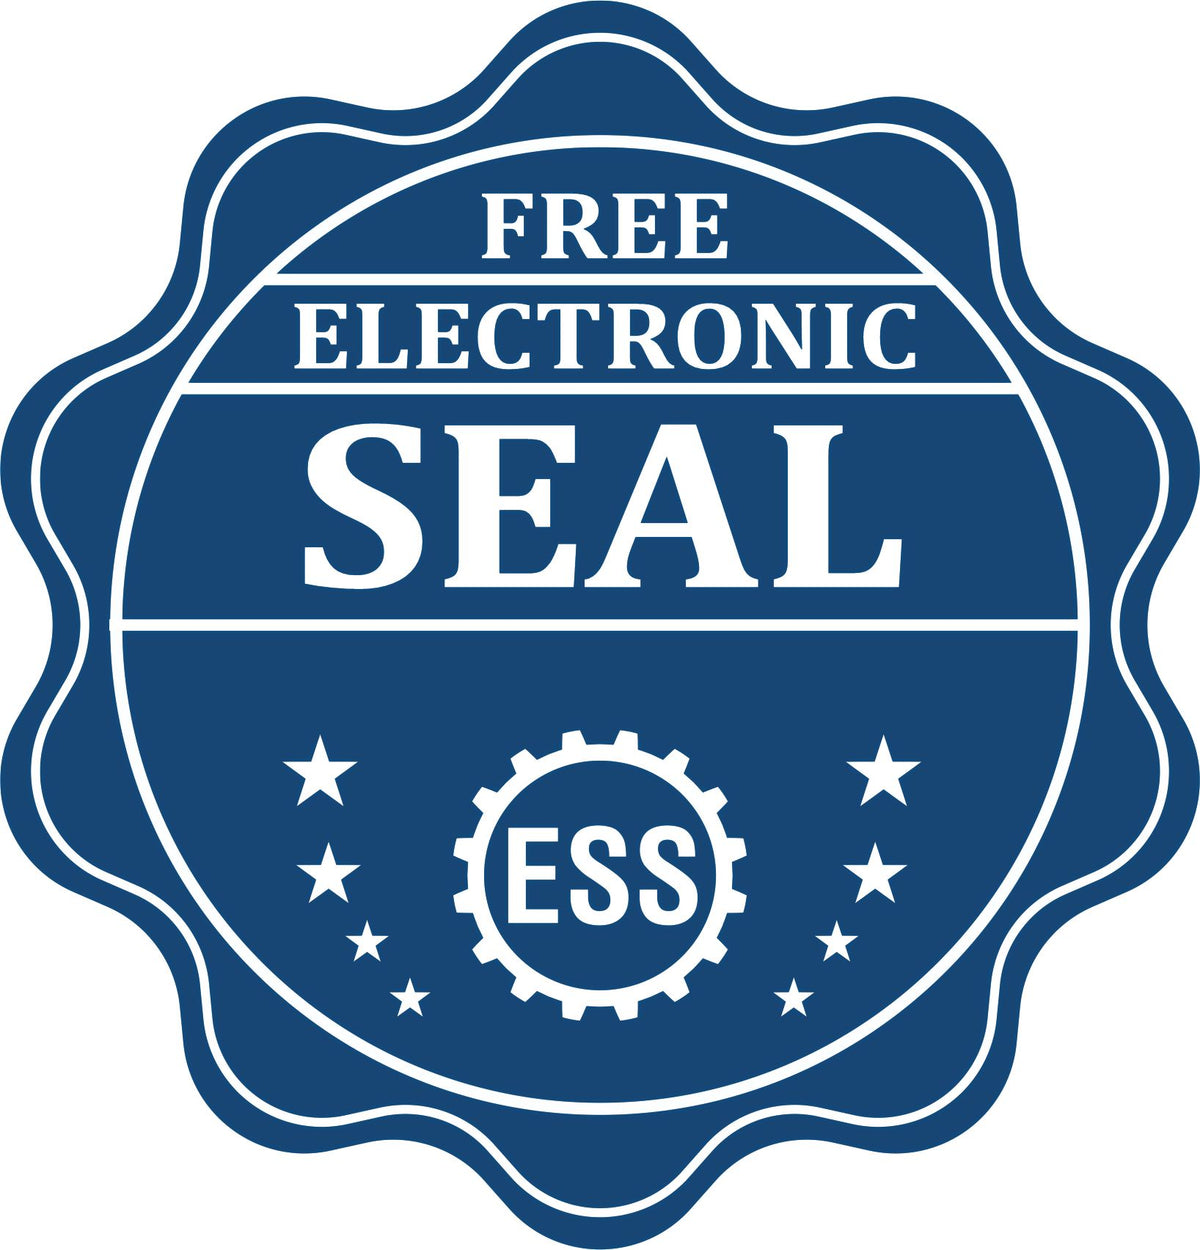 A badge showing a free electronic seal for the State of Ohio Soft Land Surveyor Embossing Seal with stars and the ESS gear on the emblem.